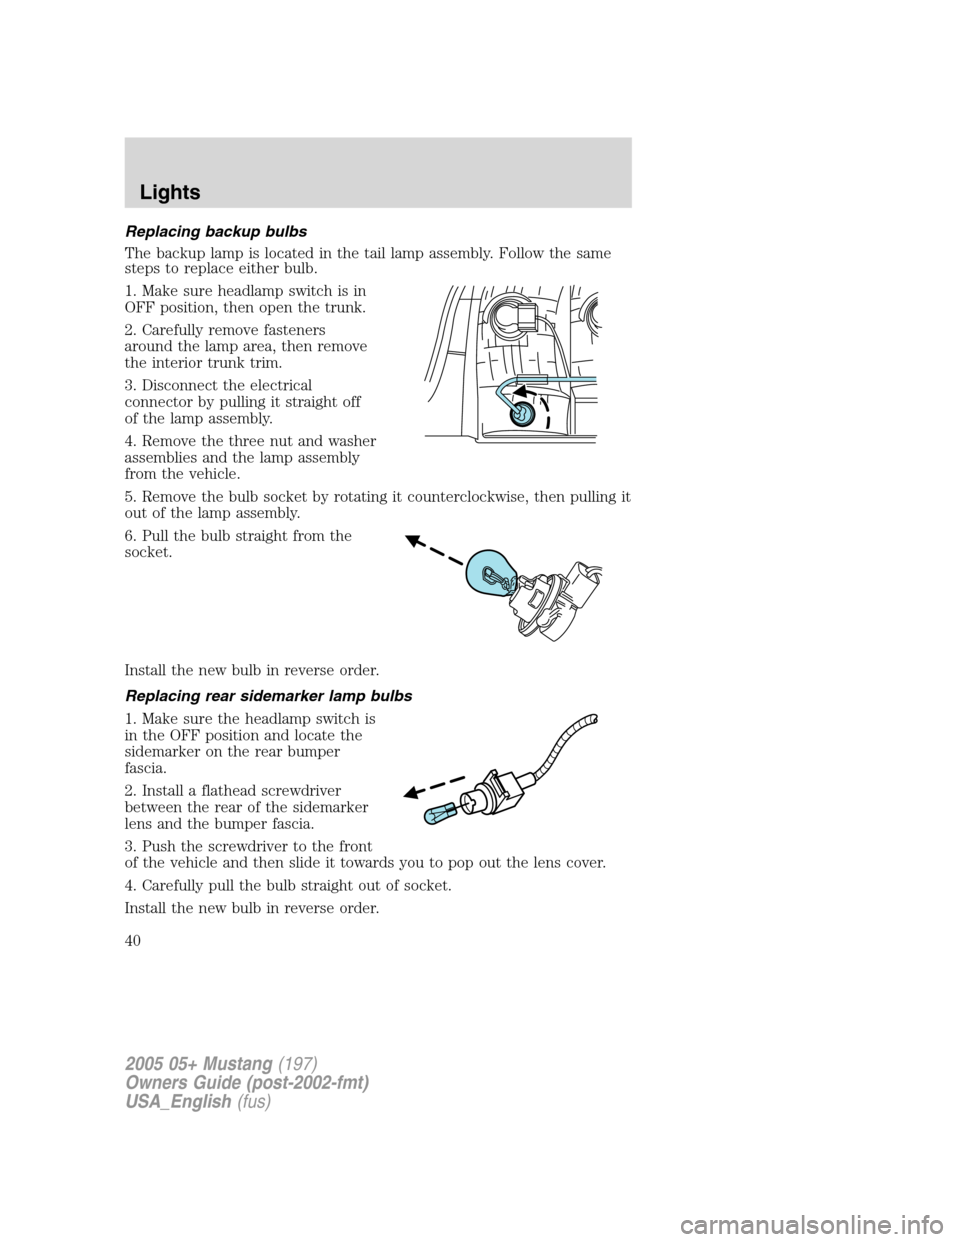 FORD MUSTANG 2005 5.G Owners Manual Replacing backup bulbs
The backup lamp is located in the tail lamp assembly. Follow the same
steps to replace either bulb.
1. Make sure headlamp switch is in
OFF position, then open the trunk.
2. Care